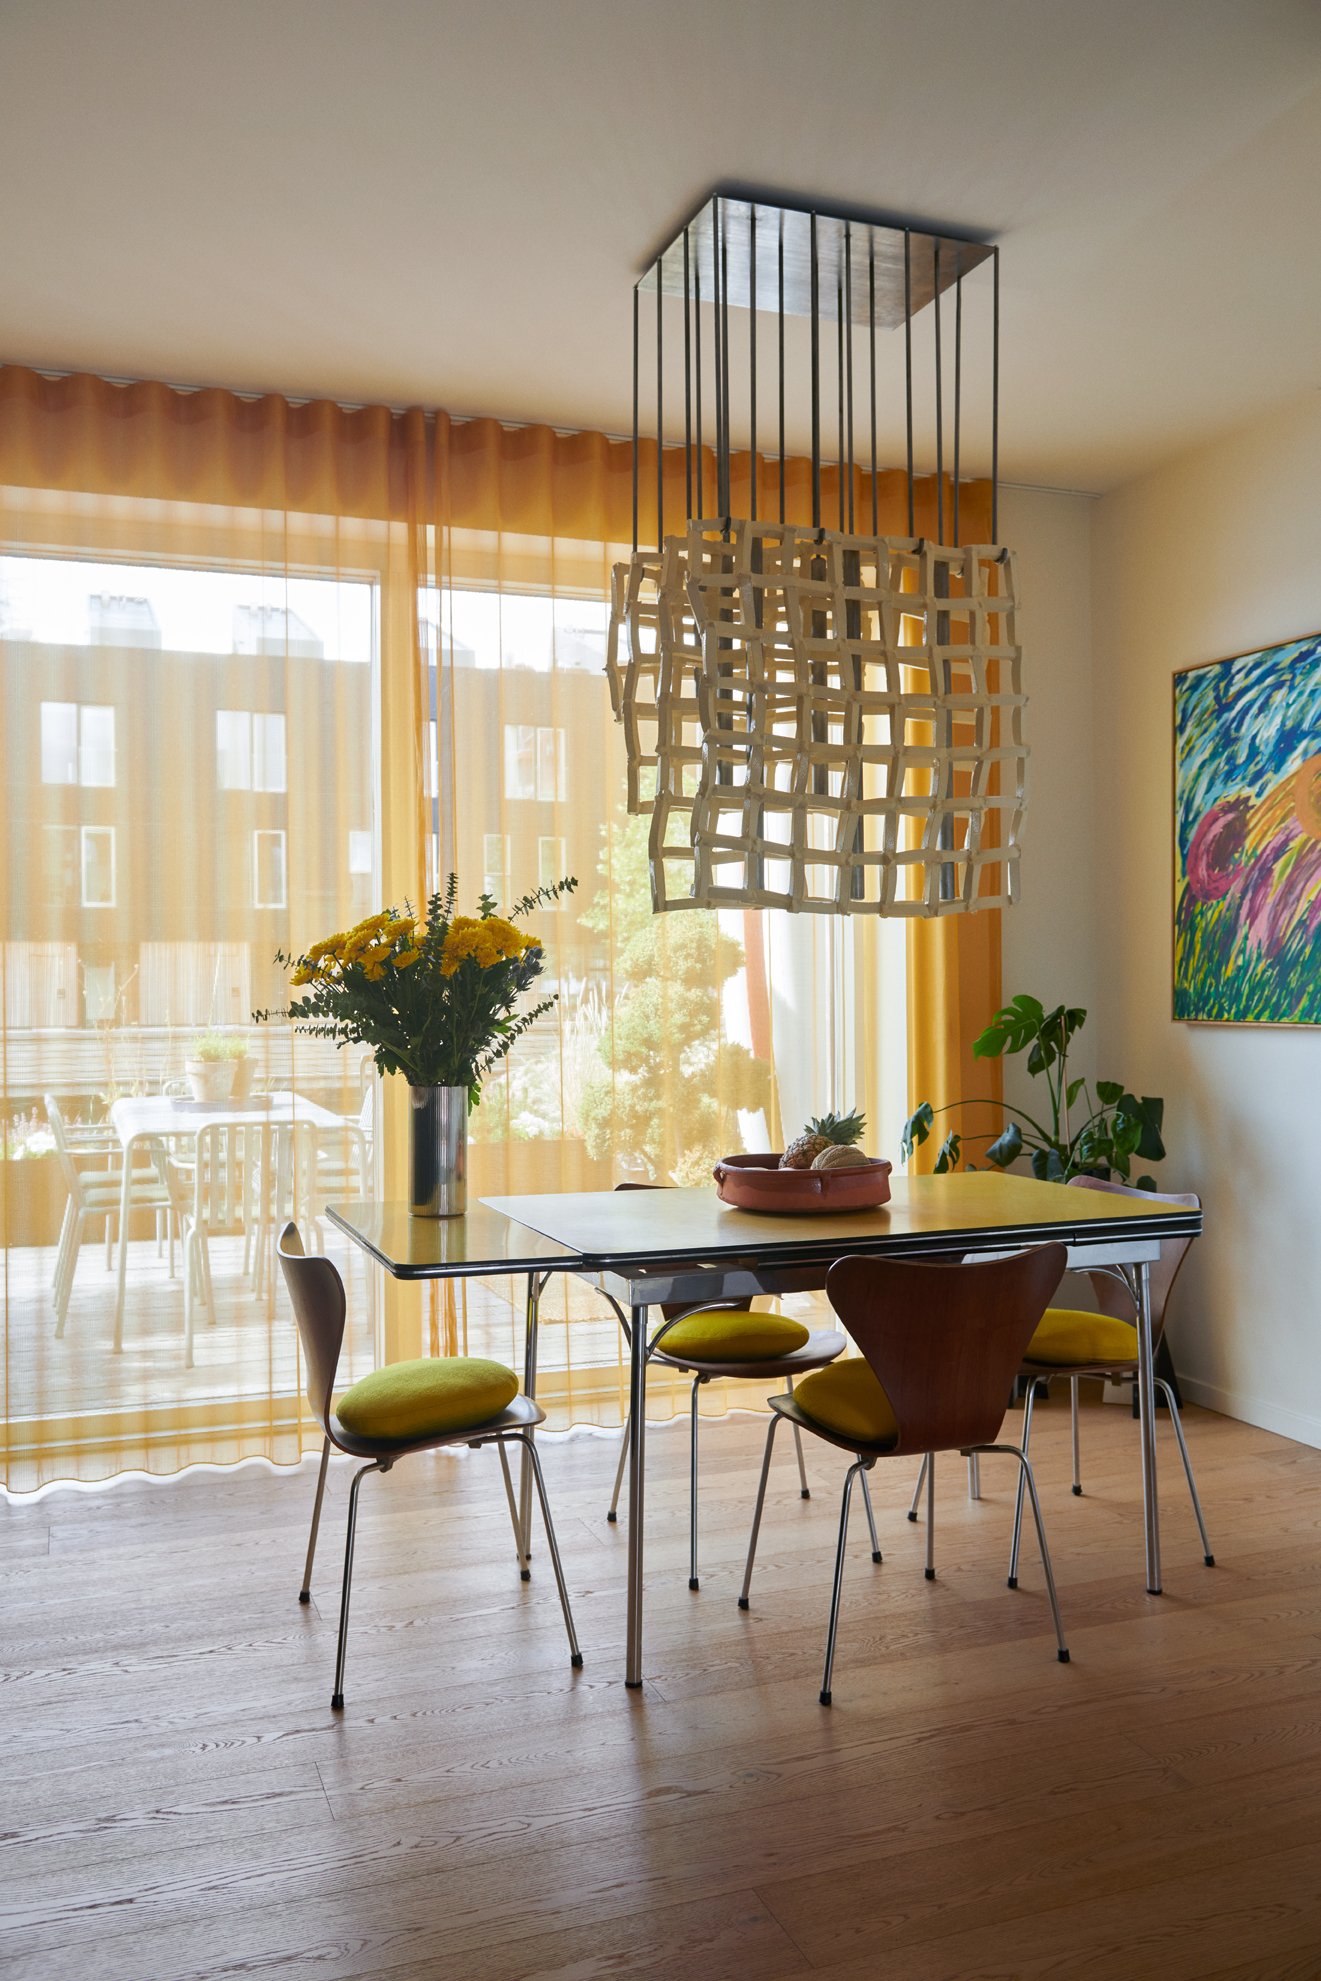  See-through curtains announce a different room colour throughout this waterfront home in Copenhagen, where Anton Hendrik Denys’  experimental furniture meets mid-20th-century classics.     photography | Elizabeth Heltoft Arnby    text | TF Chan    f